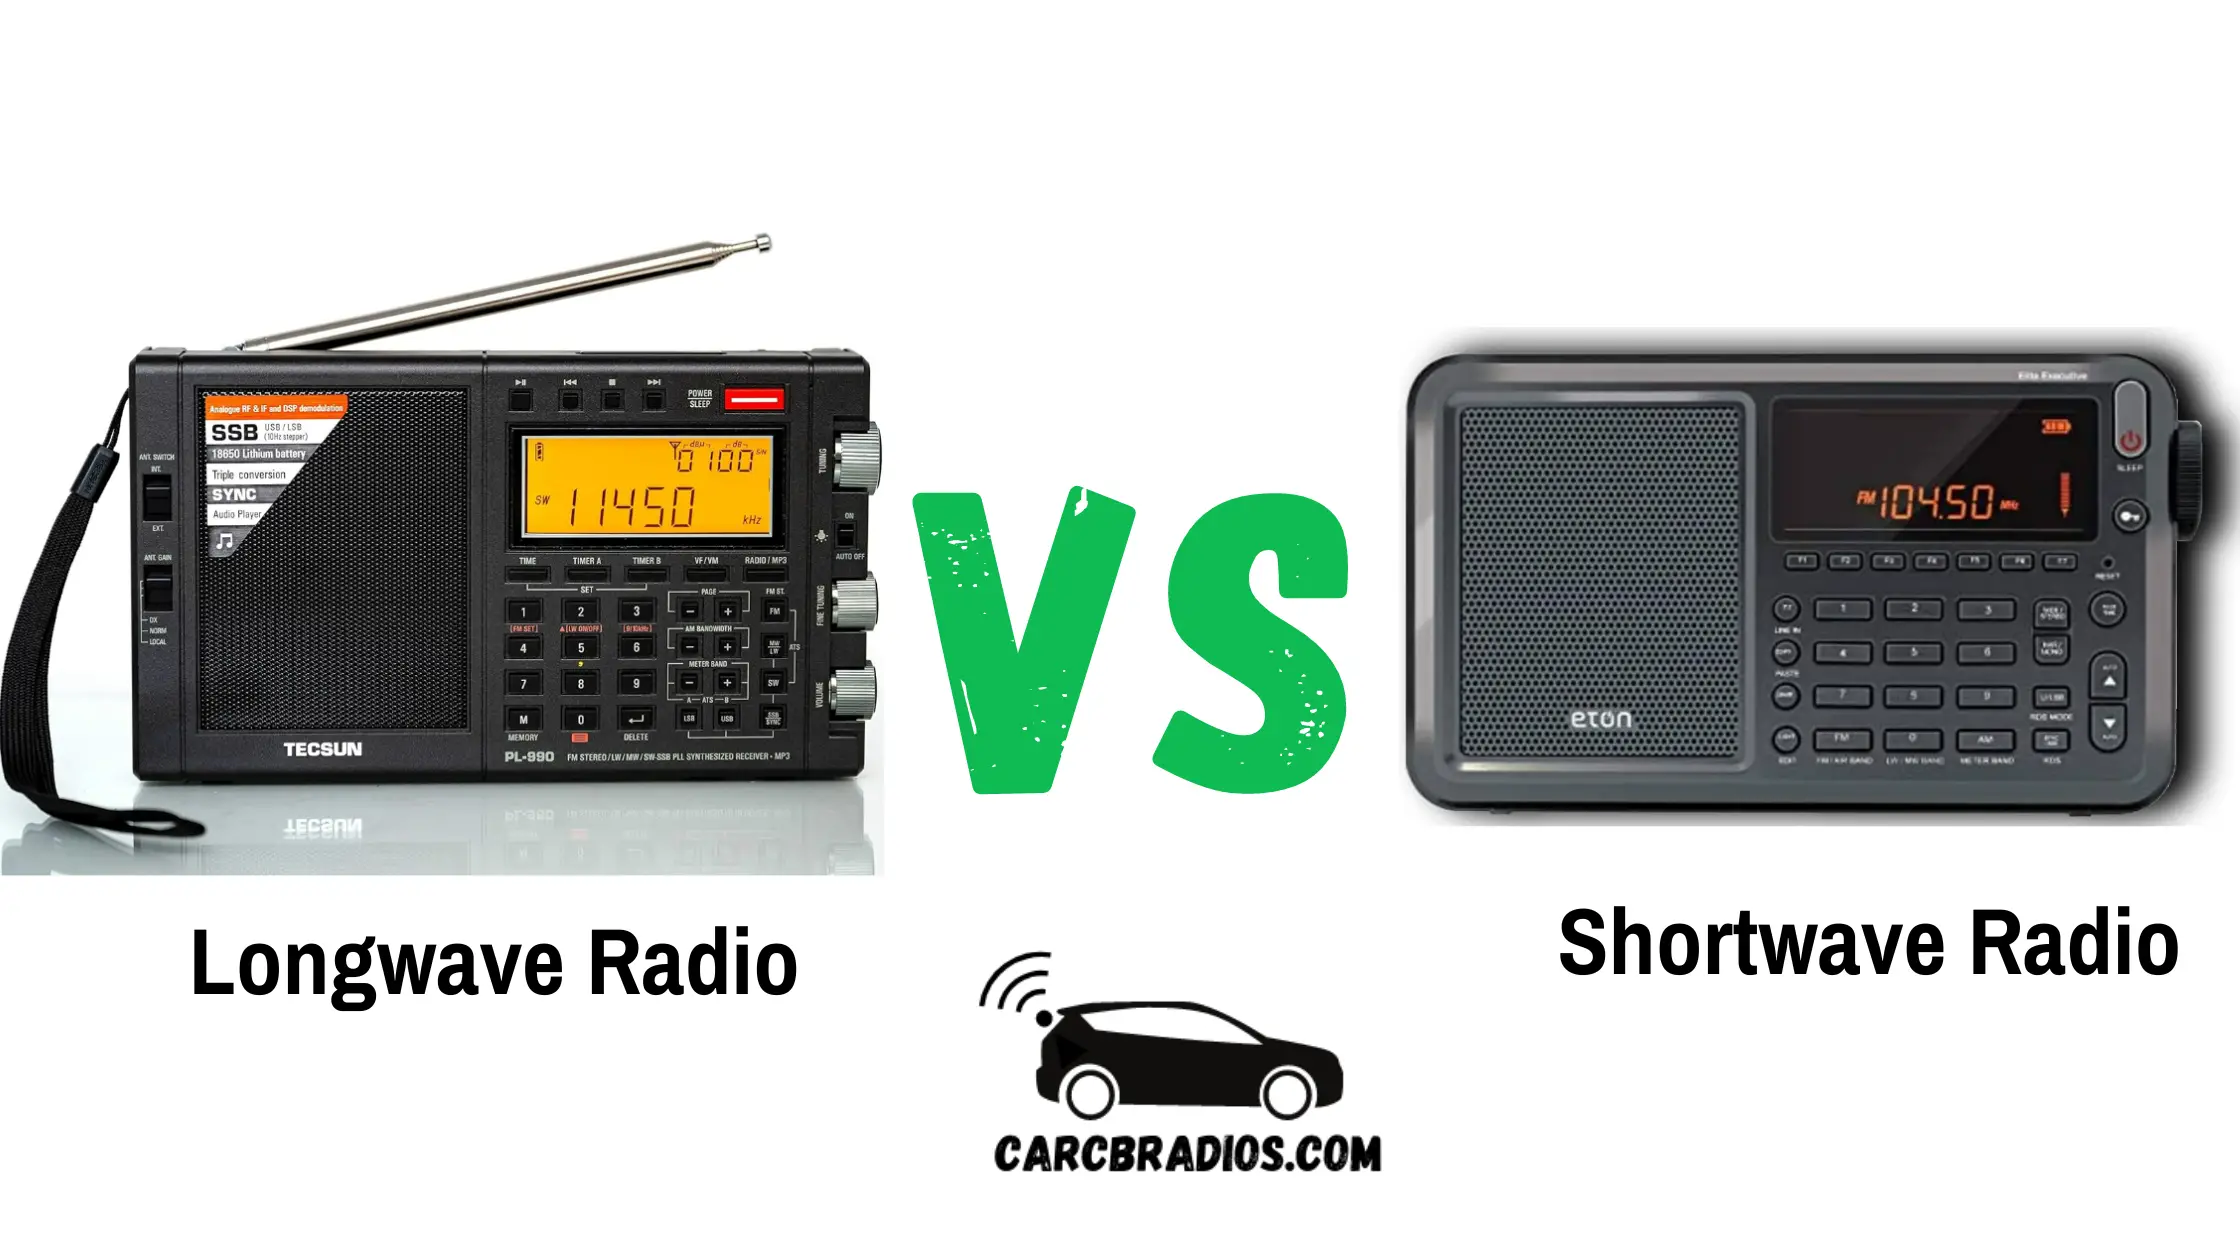 Longwave radios capture signals with low frequencies ranging from 30 to 279 kHz, while shortwave radios tune into higher-frequency signals that range from 3 to 30 MHz (3,000 and 30,000 kHz). Understanding the differences between longwaves and shortwaves, along with their respective radios, enables a clearer comprehension of their applications in various communication scenarios.